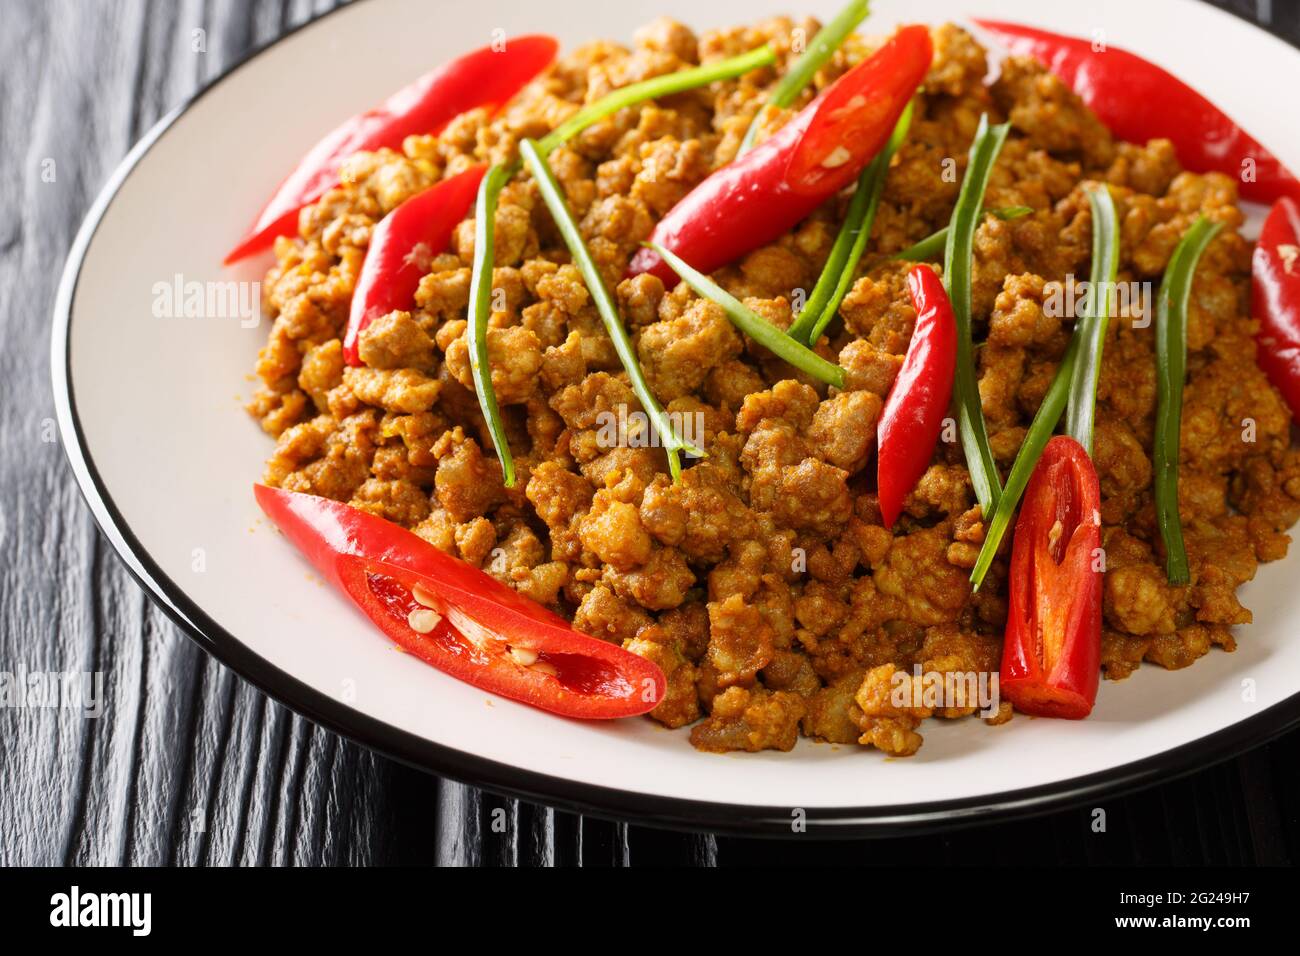 https://c8.alamy.com/comp/2G249H7/khua-kling-also-known-as-thai-dry-mince-curry-is-a-traditional-dish-from-southern-thailand-featuring-ground-meat-curry-paste-close-up-in-the-plate-on-2G249H7.jpg